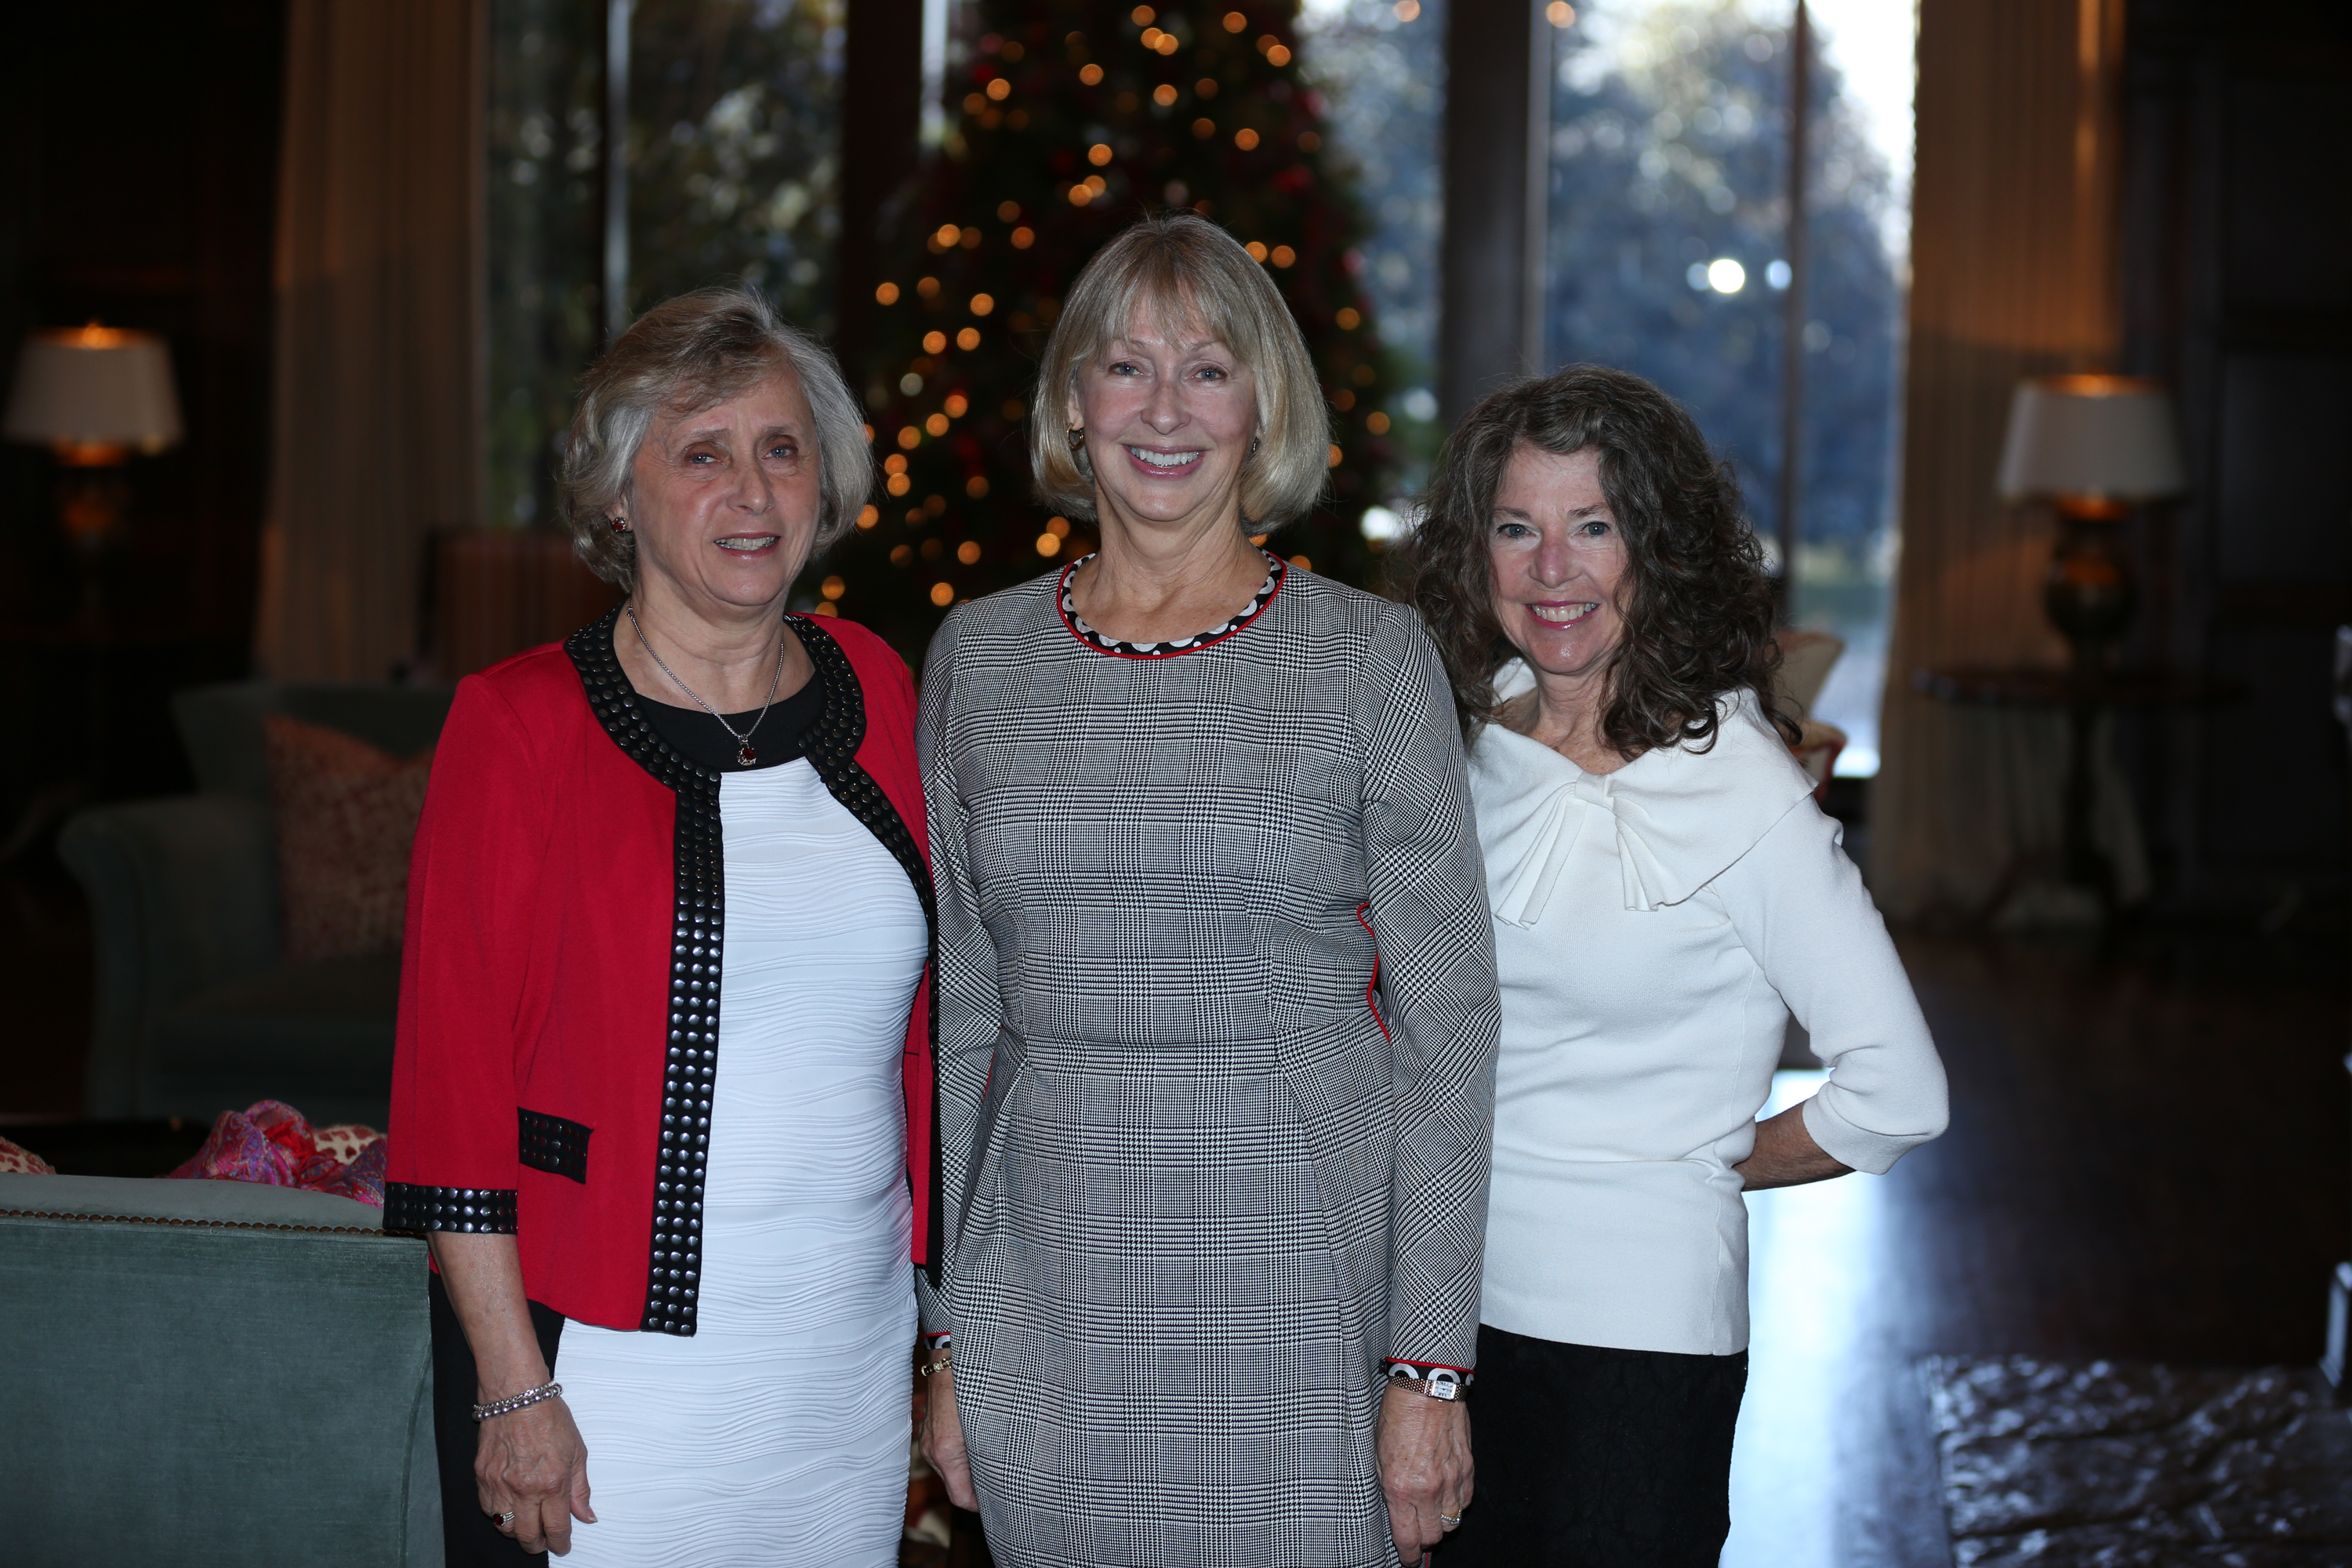 Gail Van Way, Vicki Baxter, and Michelle Fasel. Photographer: Larry F. Levenson